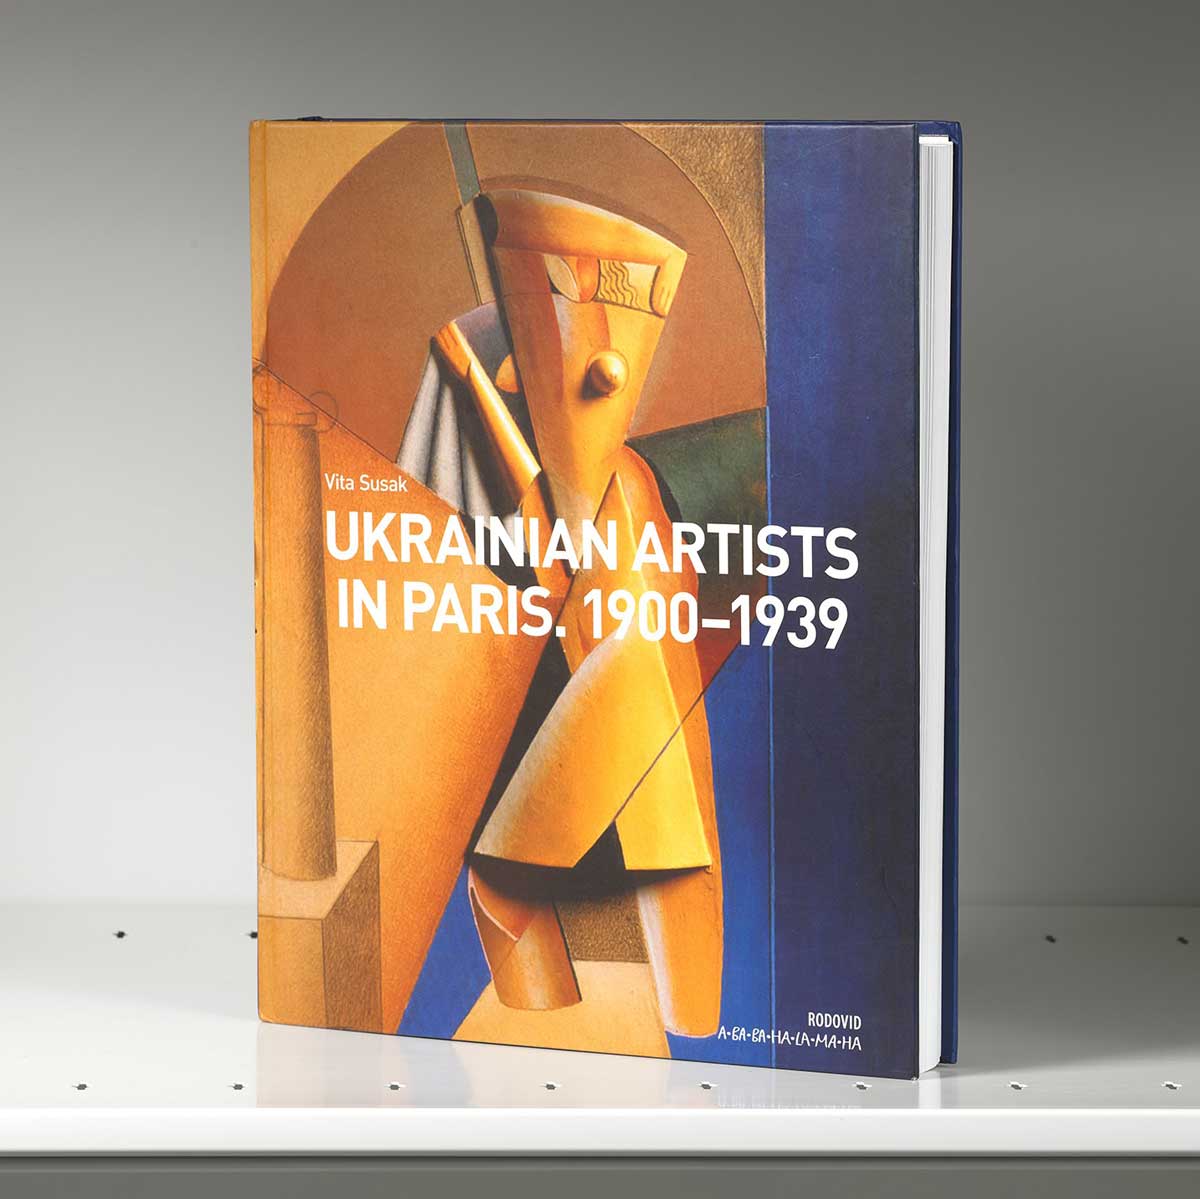 Book on a shelf whose cover featured an abstract yellow Cubist figure